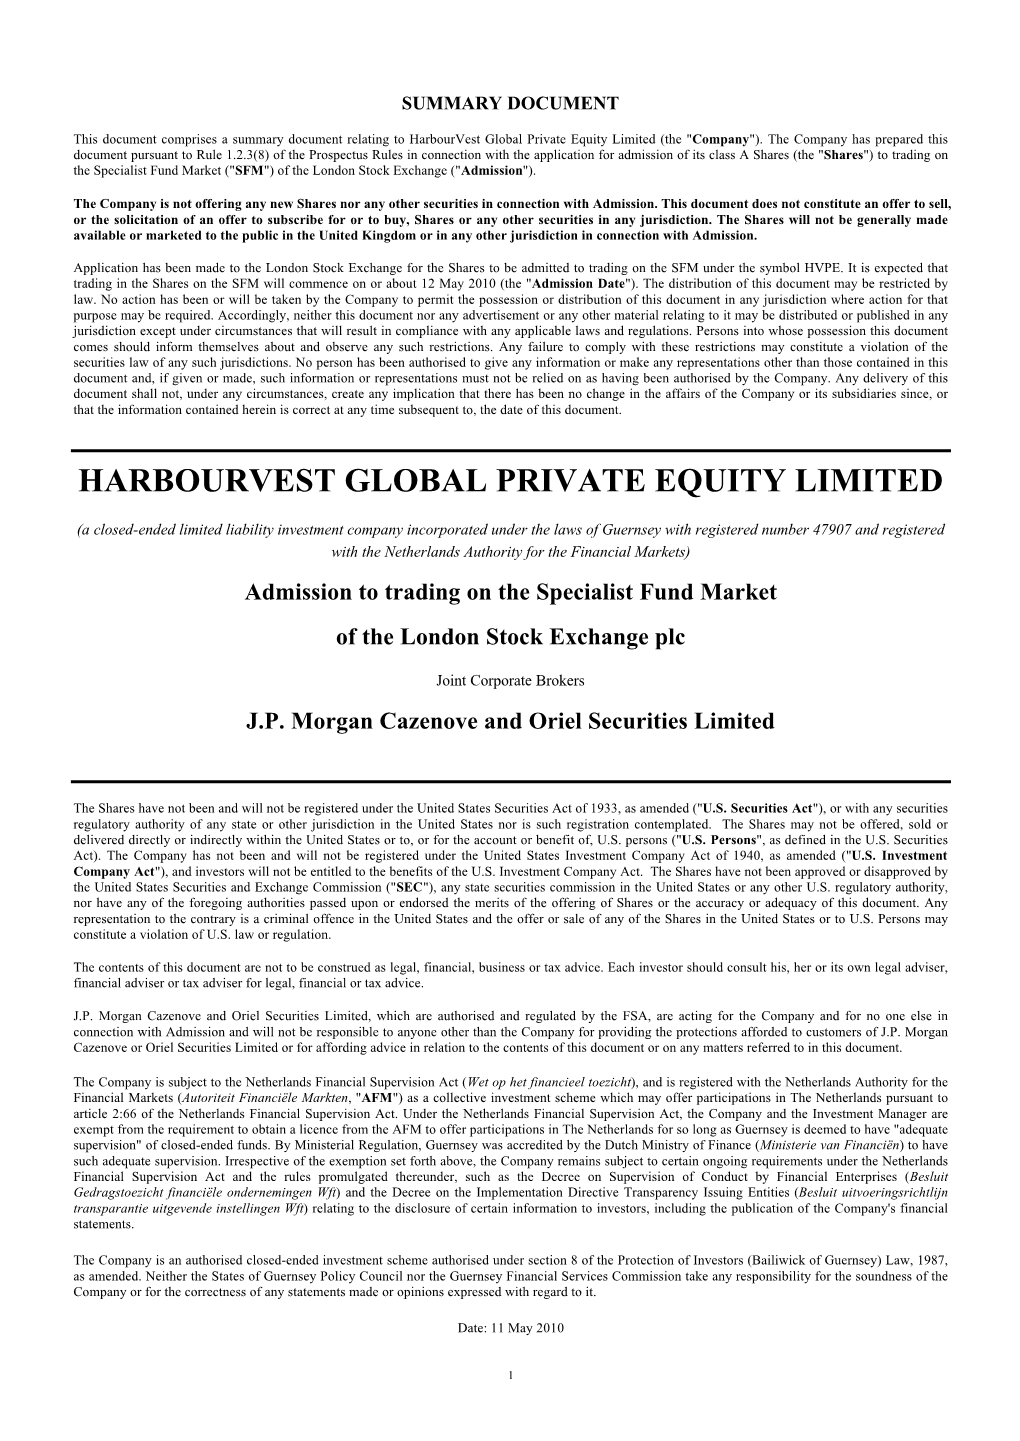 Harbourvest Global Private Equity Limited (The "Company")